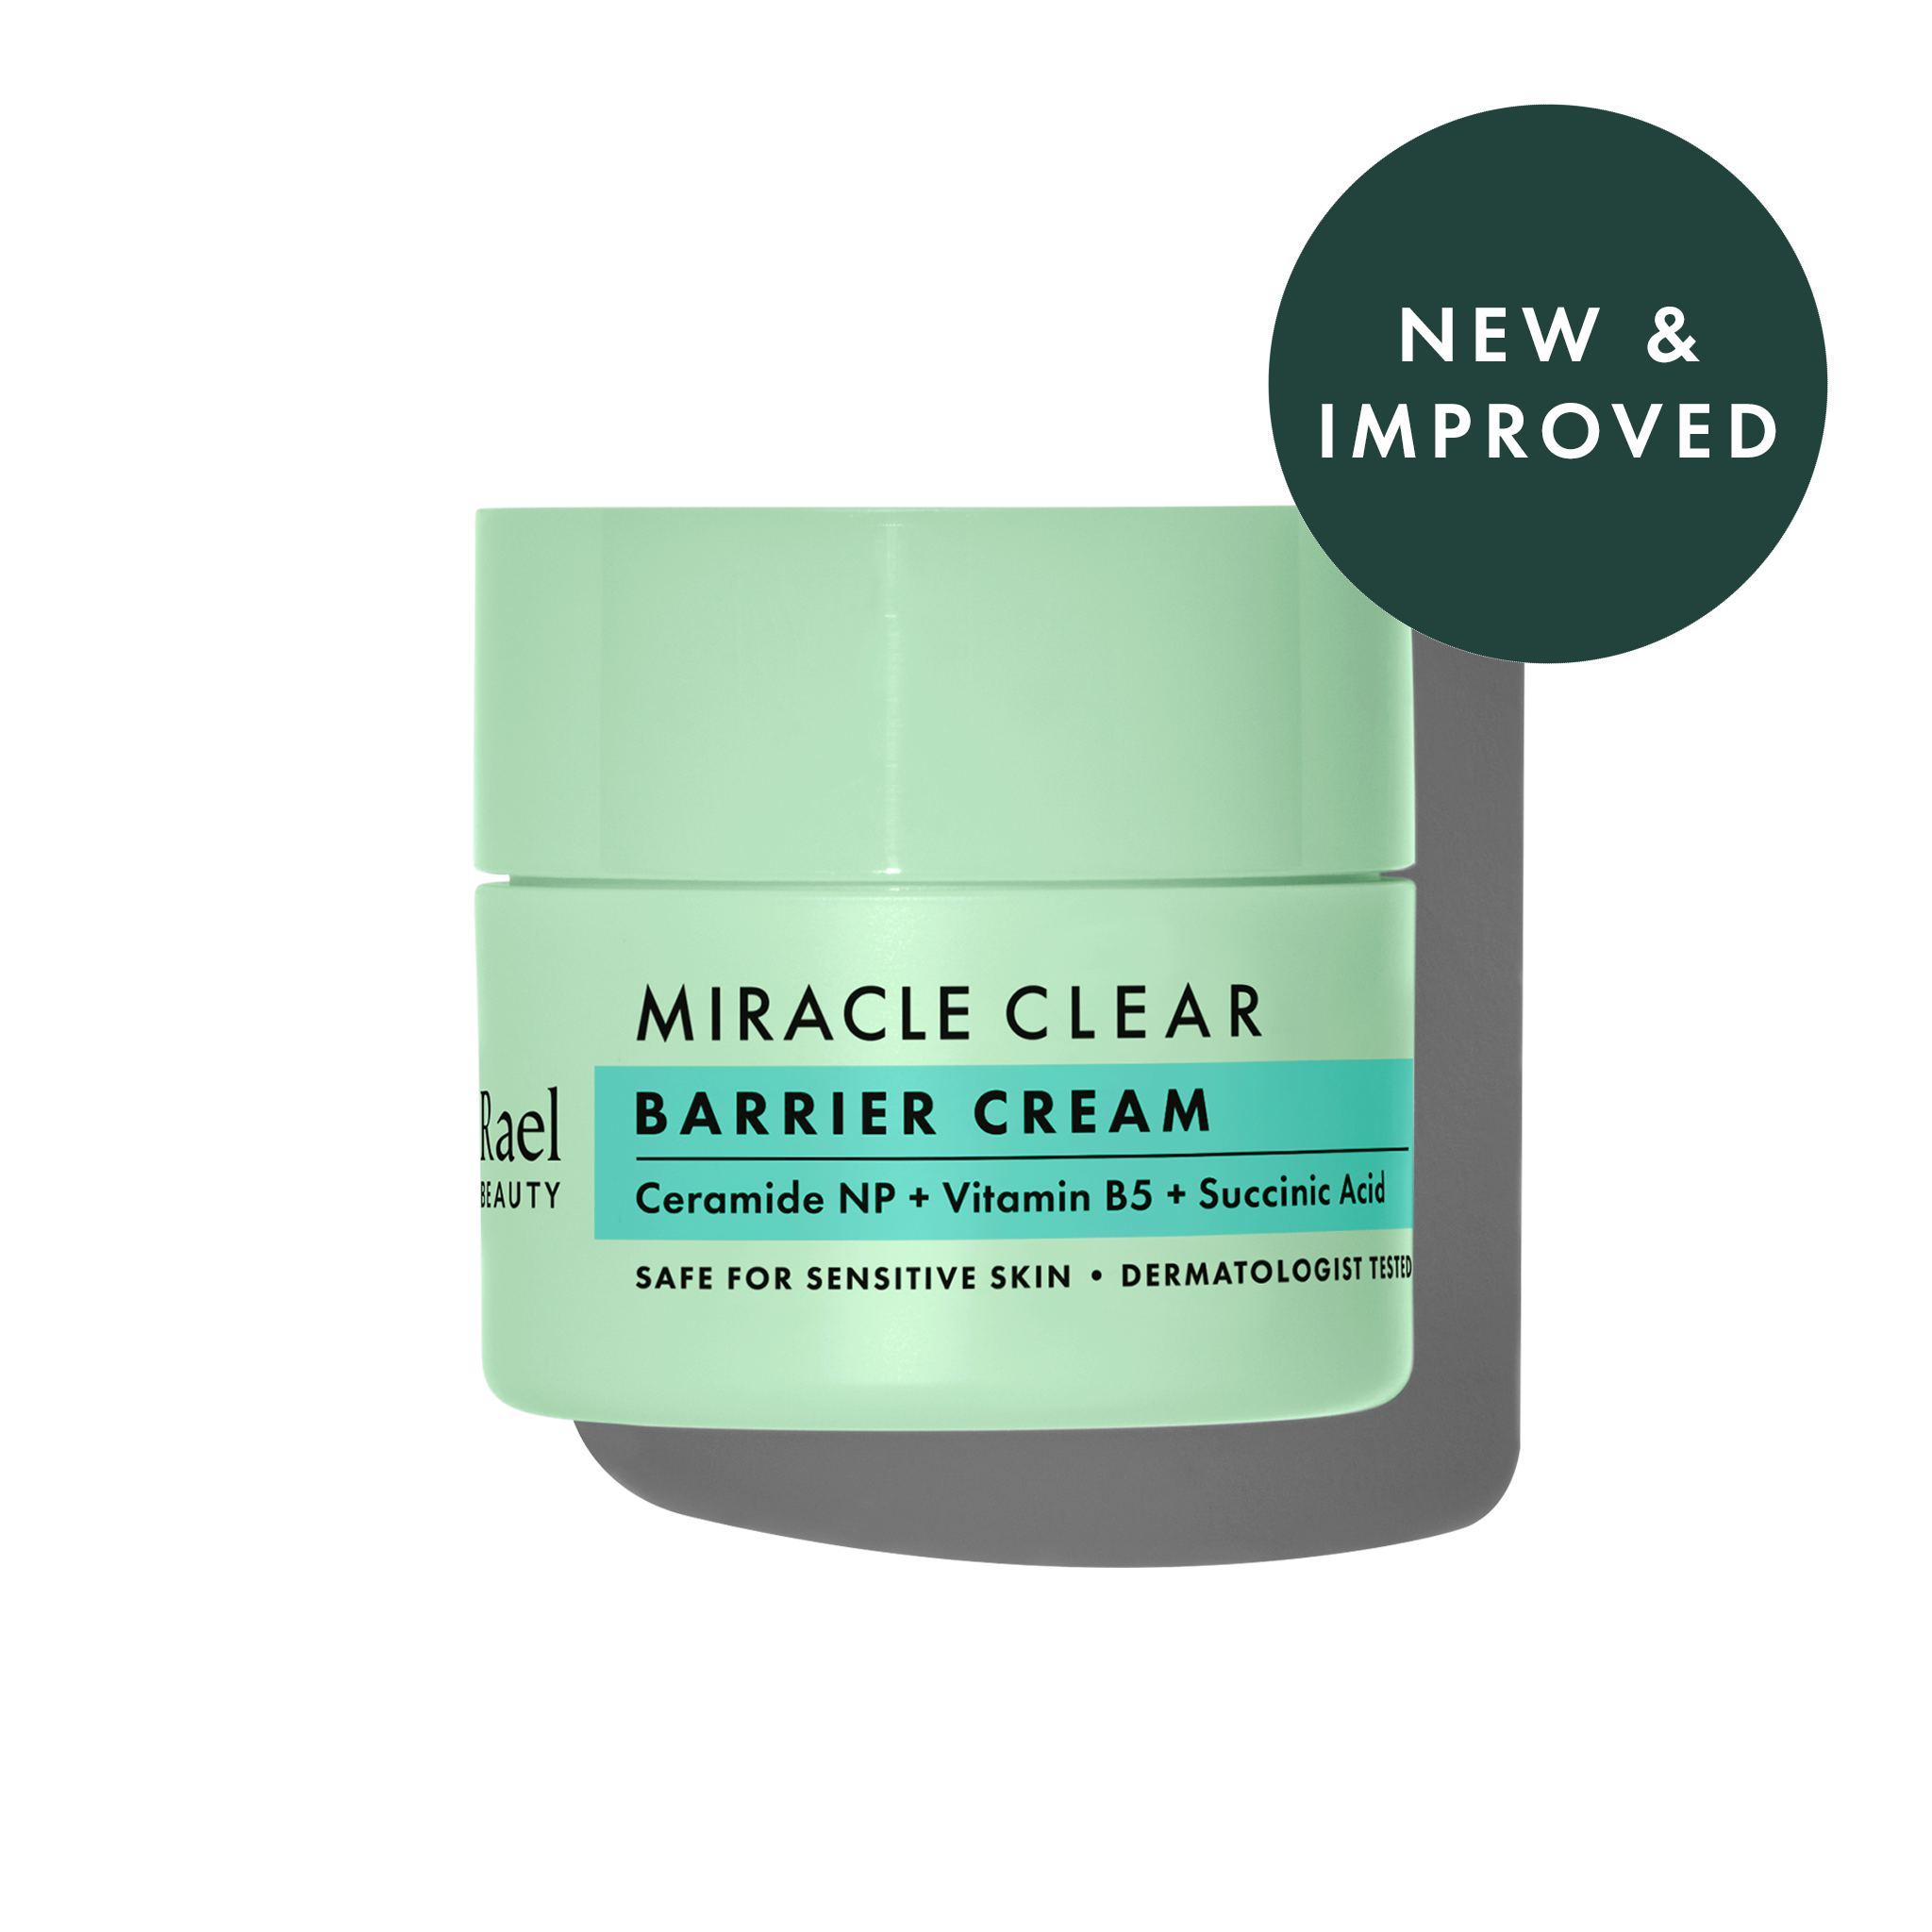 Miracle Clear Barrier Cream for the face